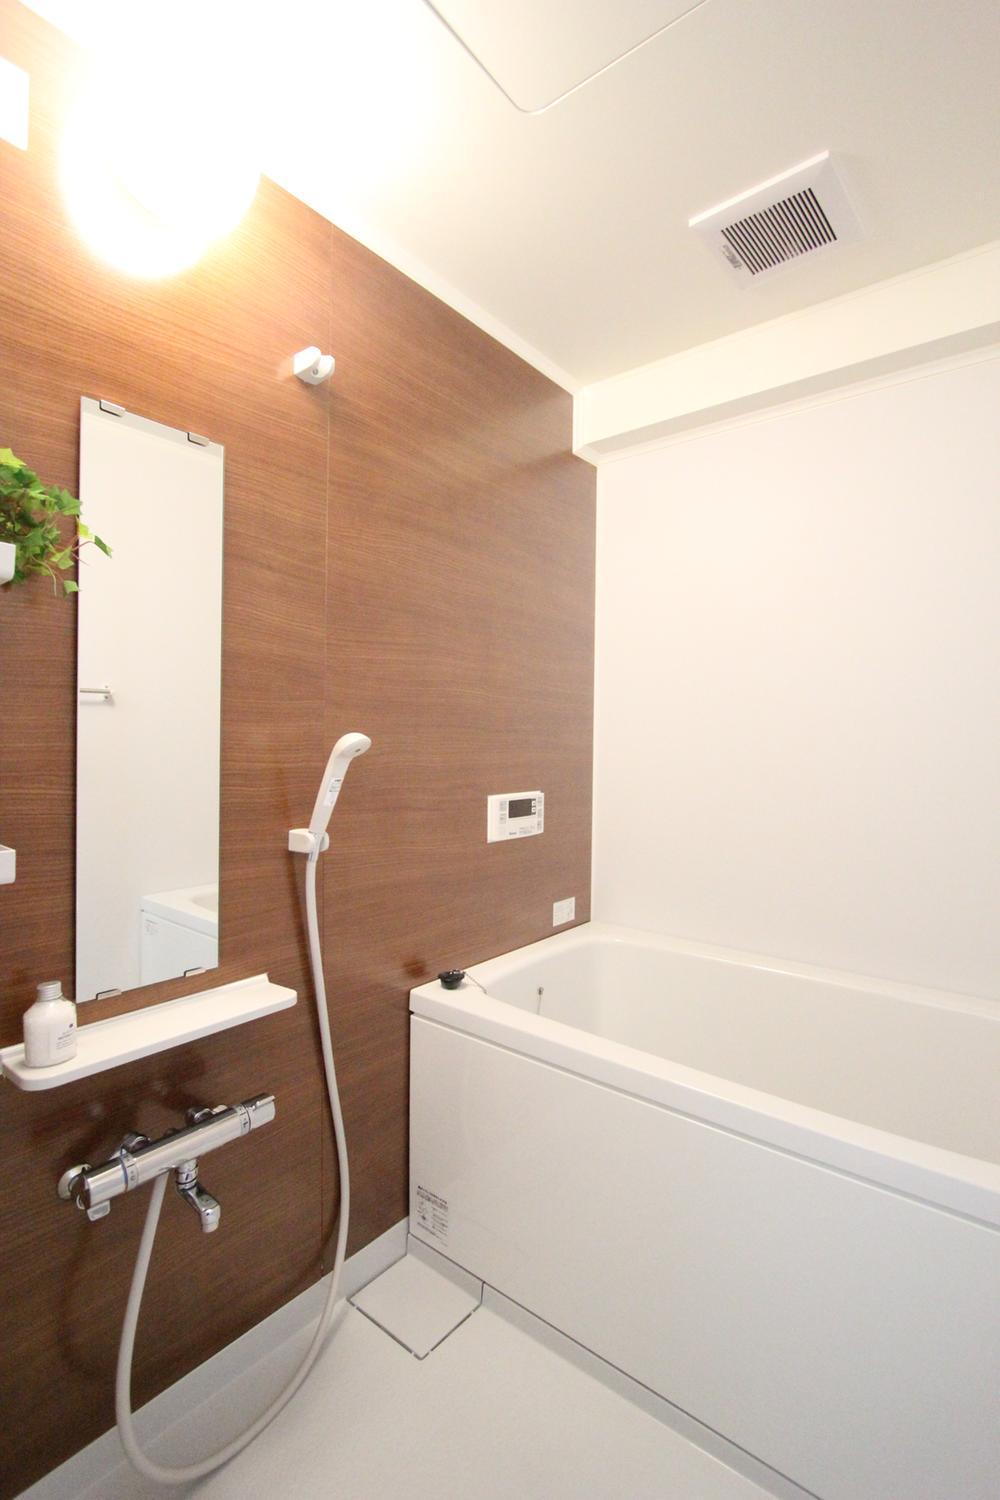 Bathroom. The salesman which has a national qualification of FP (financial planner), It is carefully to suggestions made to the customer's point of view. Please feel free to contact us. We look forward to staff. It is OUTREACH of sincerity business.